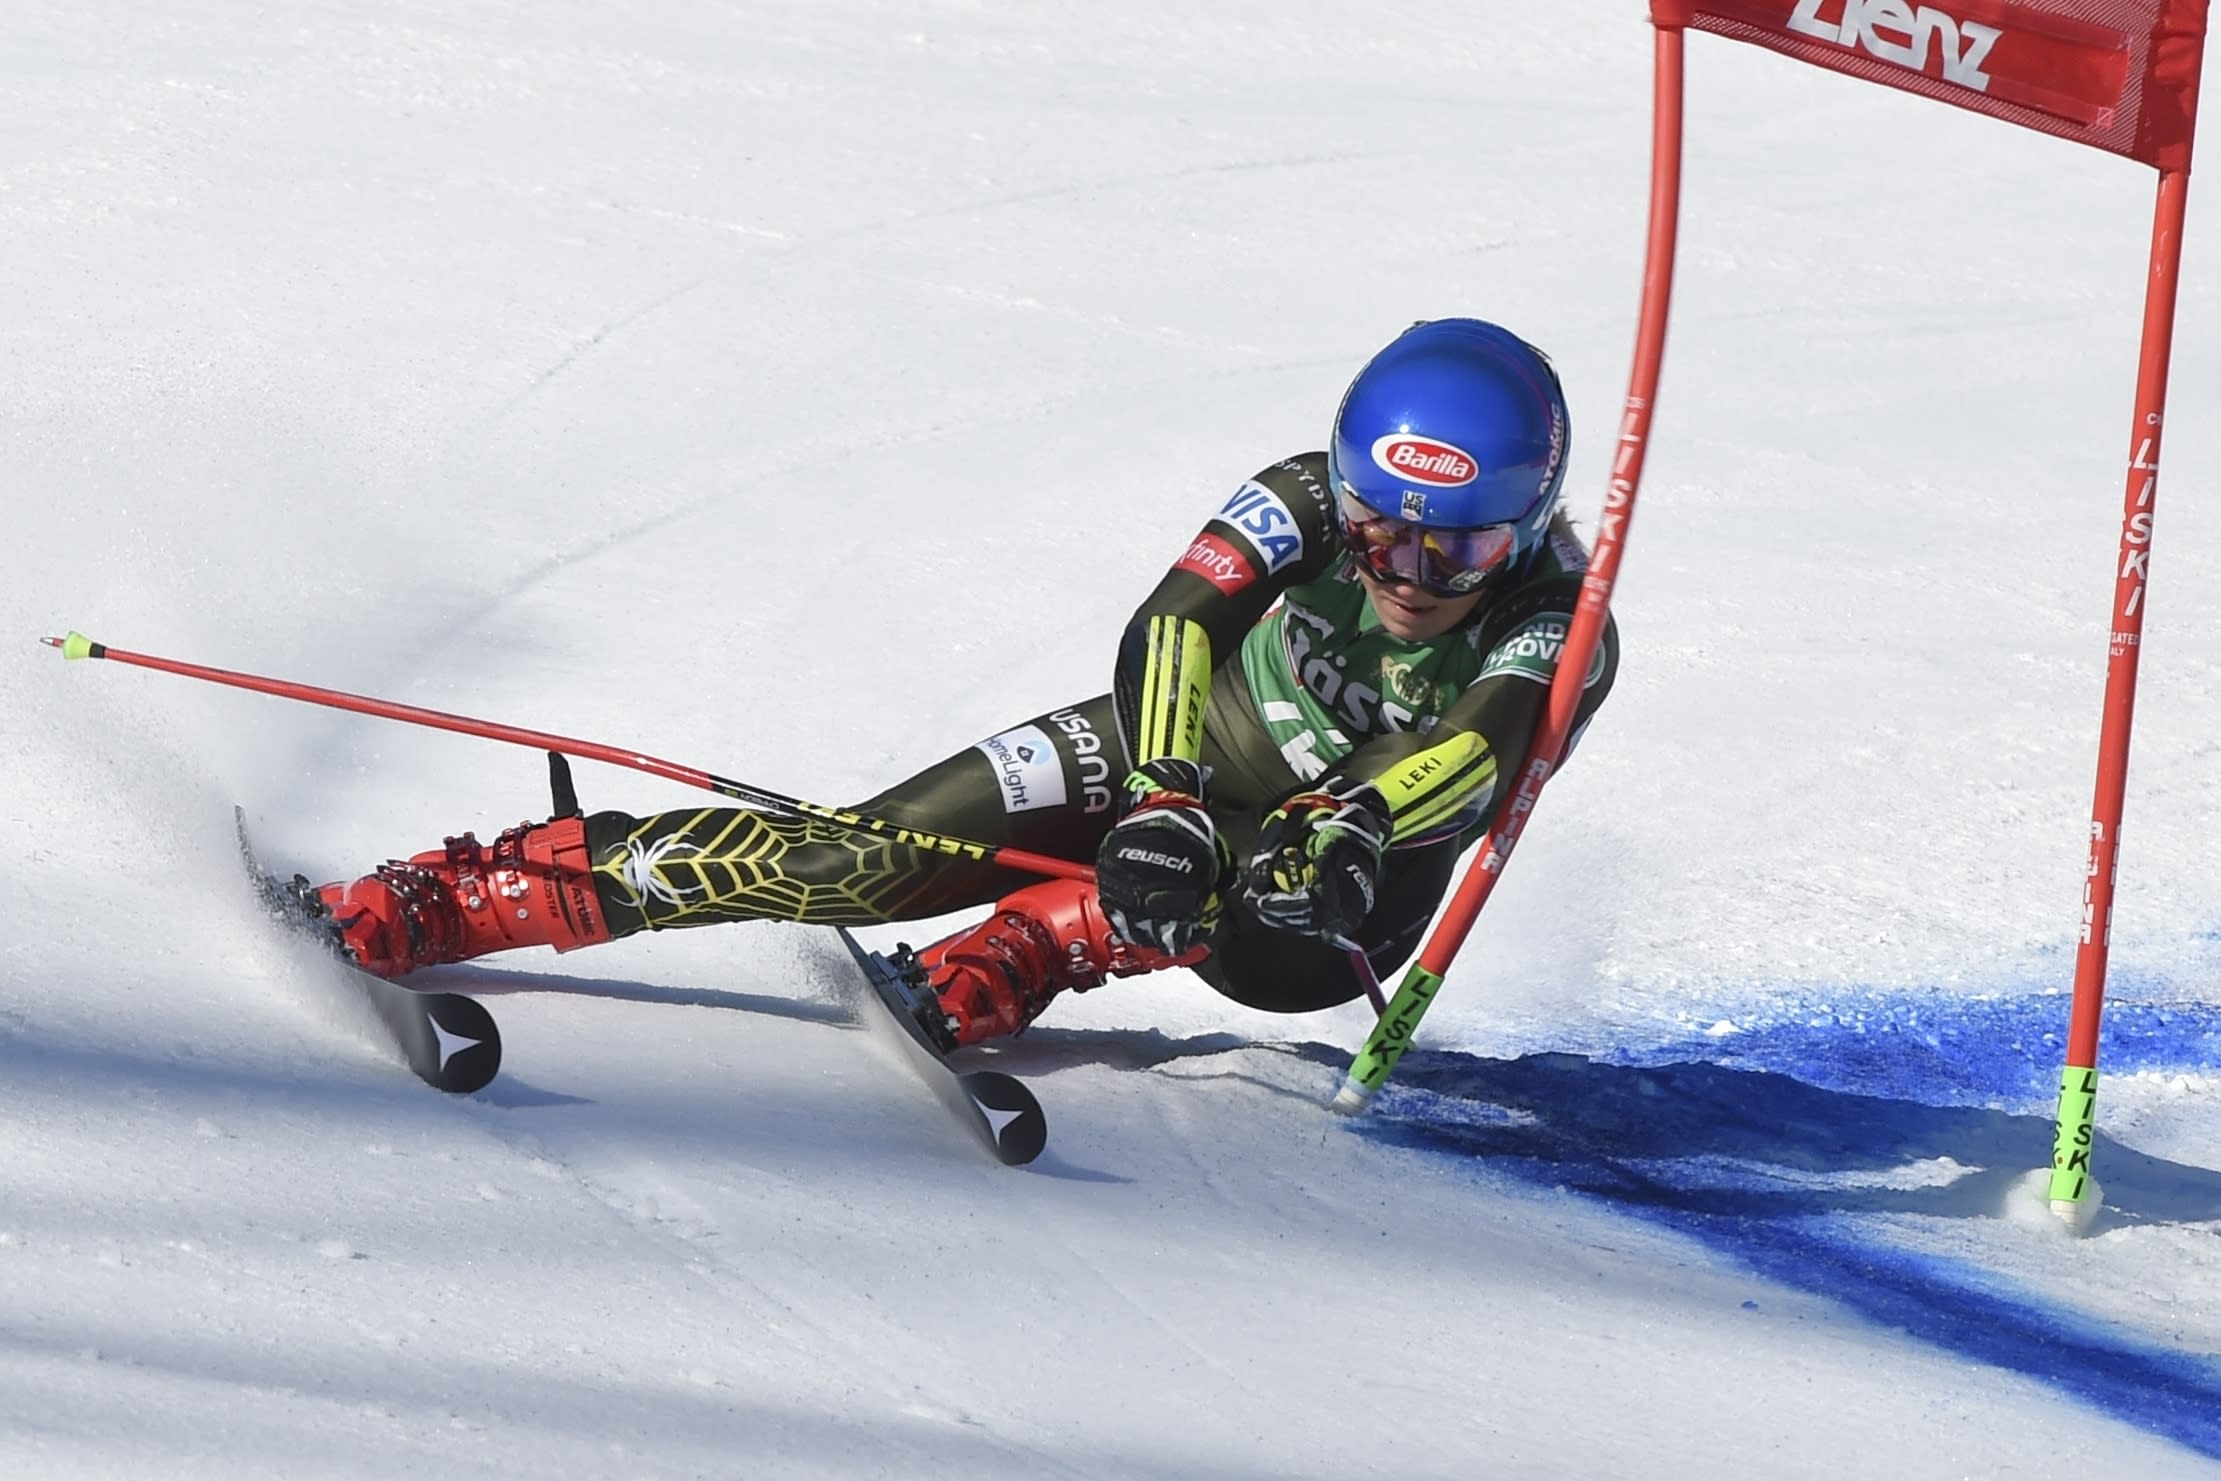 Leaving it late: Shiffrin wins GS after nearly missing start